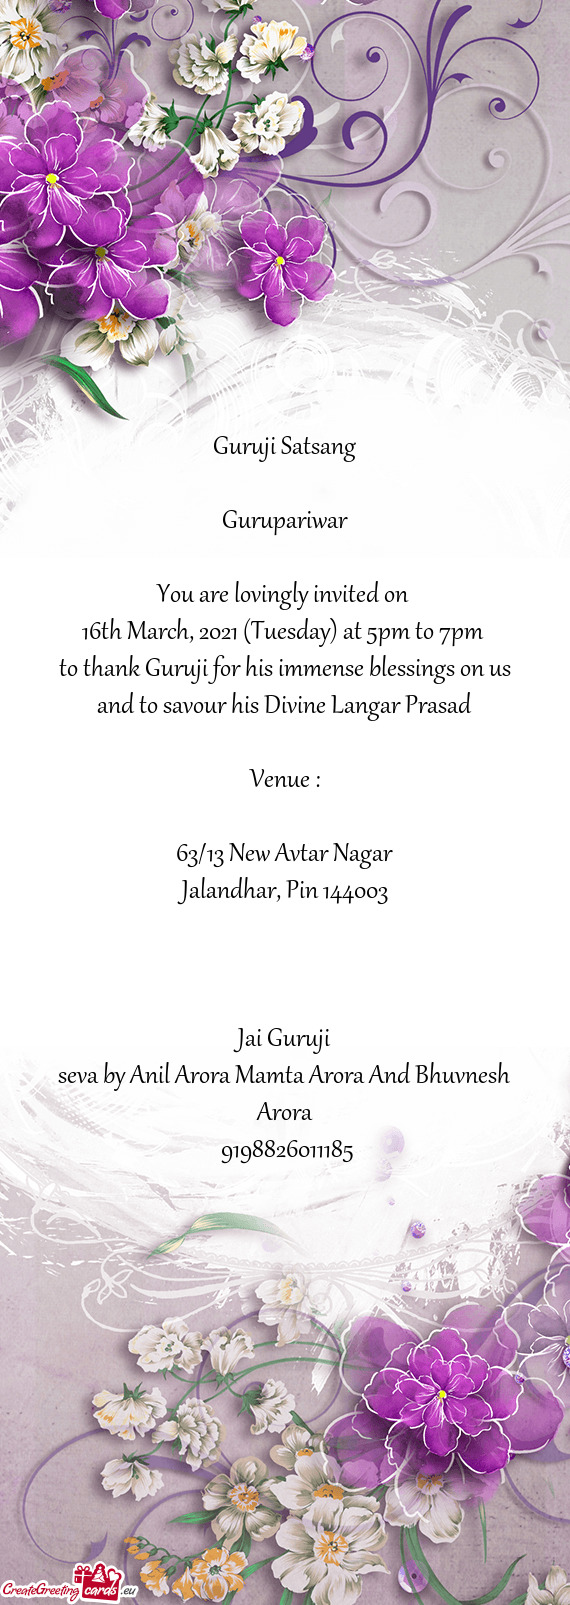 16th March, 2021 (Tuesday) at 5pm to 7pm